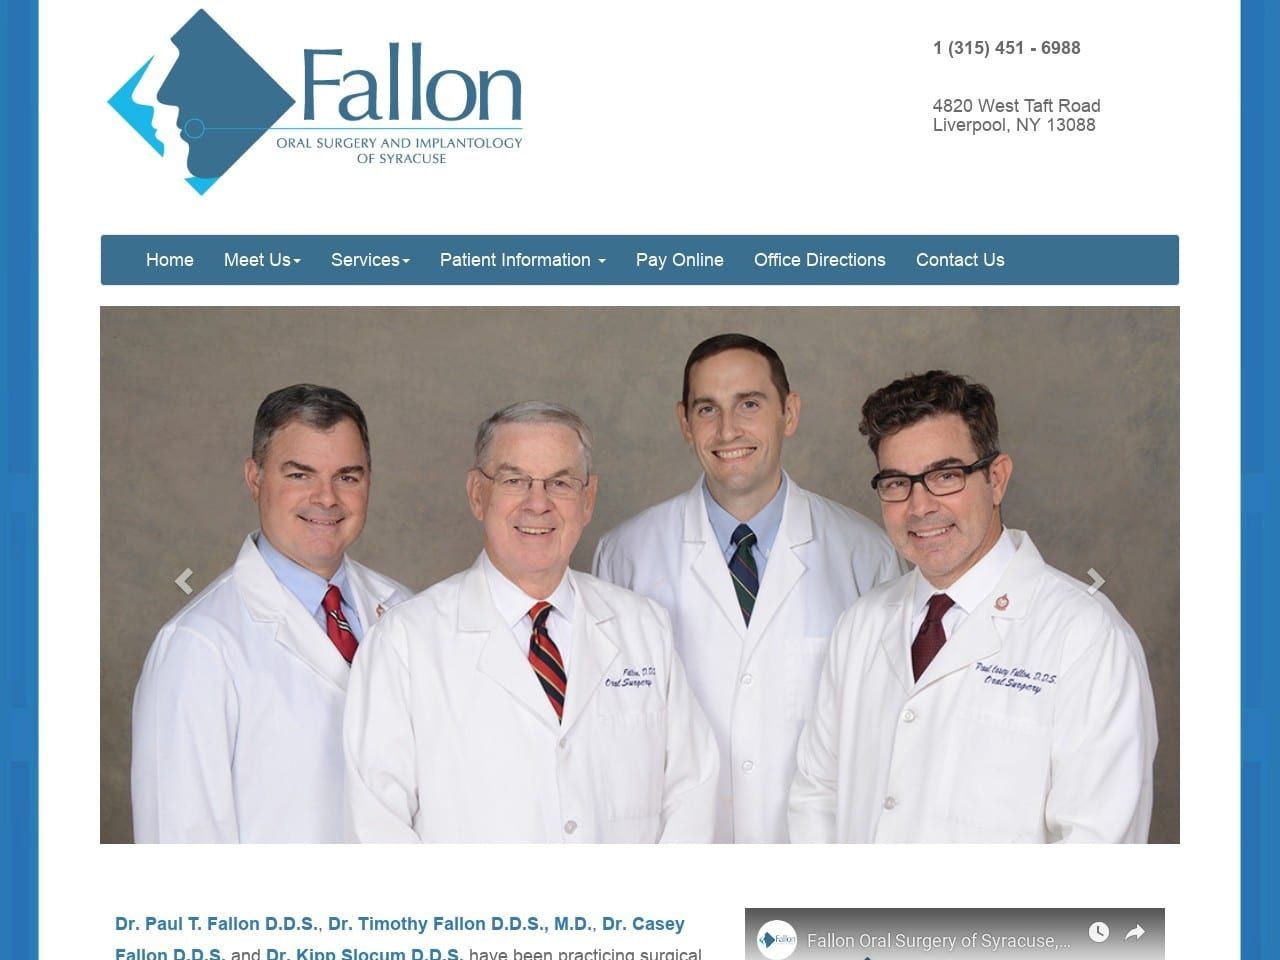 Fallon Oral Surgery of Syracuse Website Screenshot from fallonoralsurgery.com